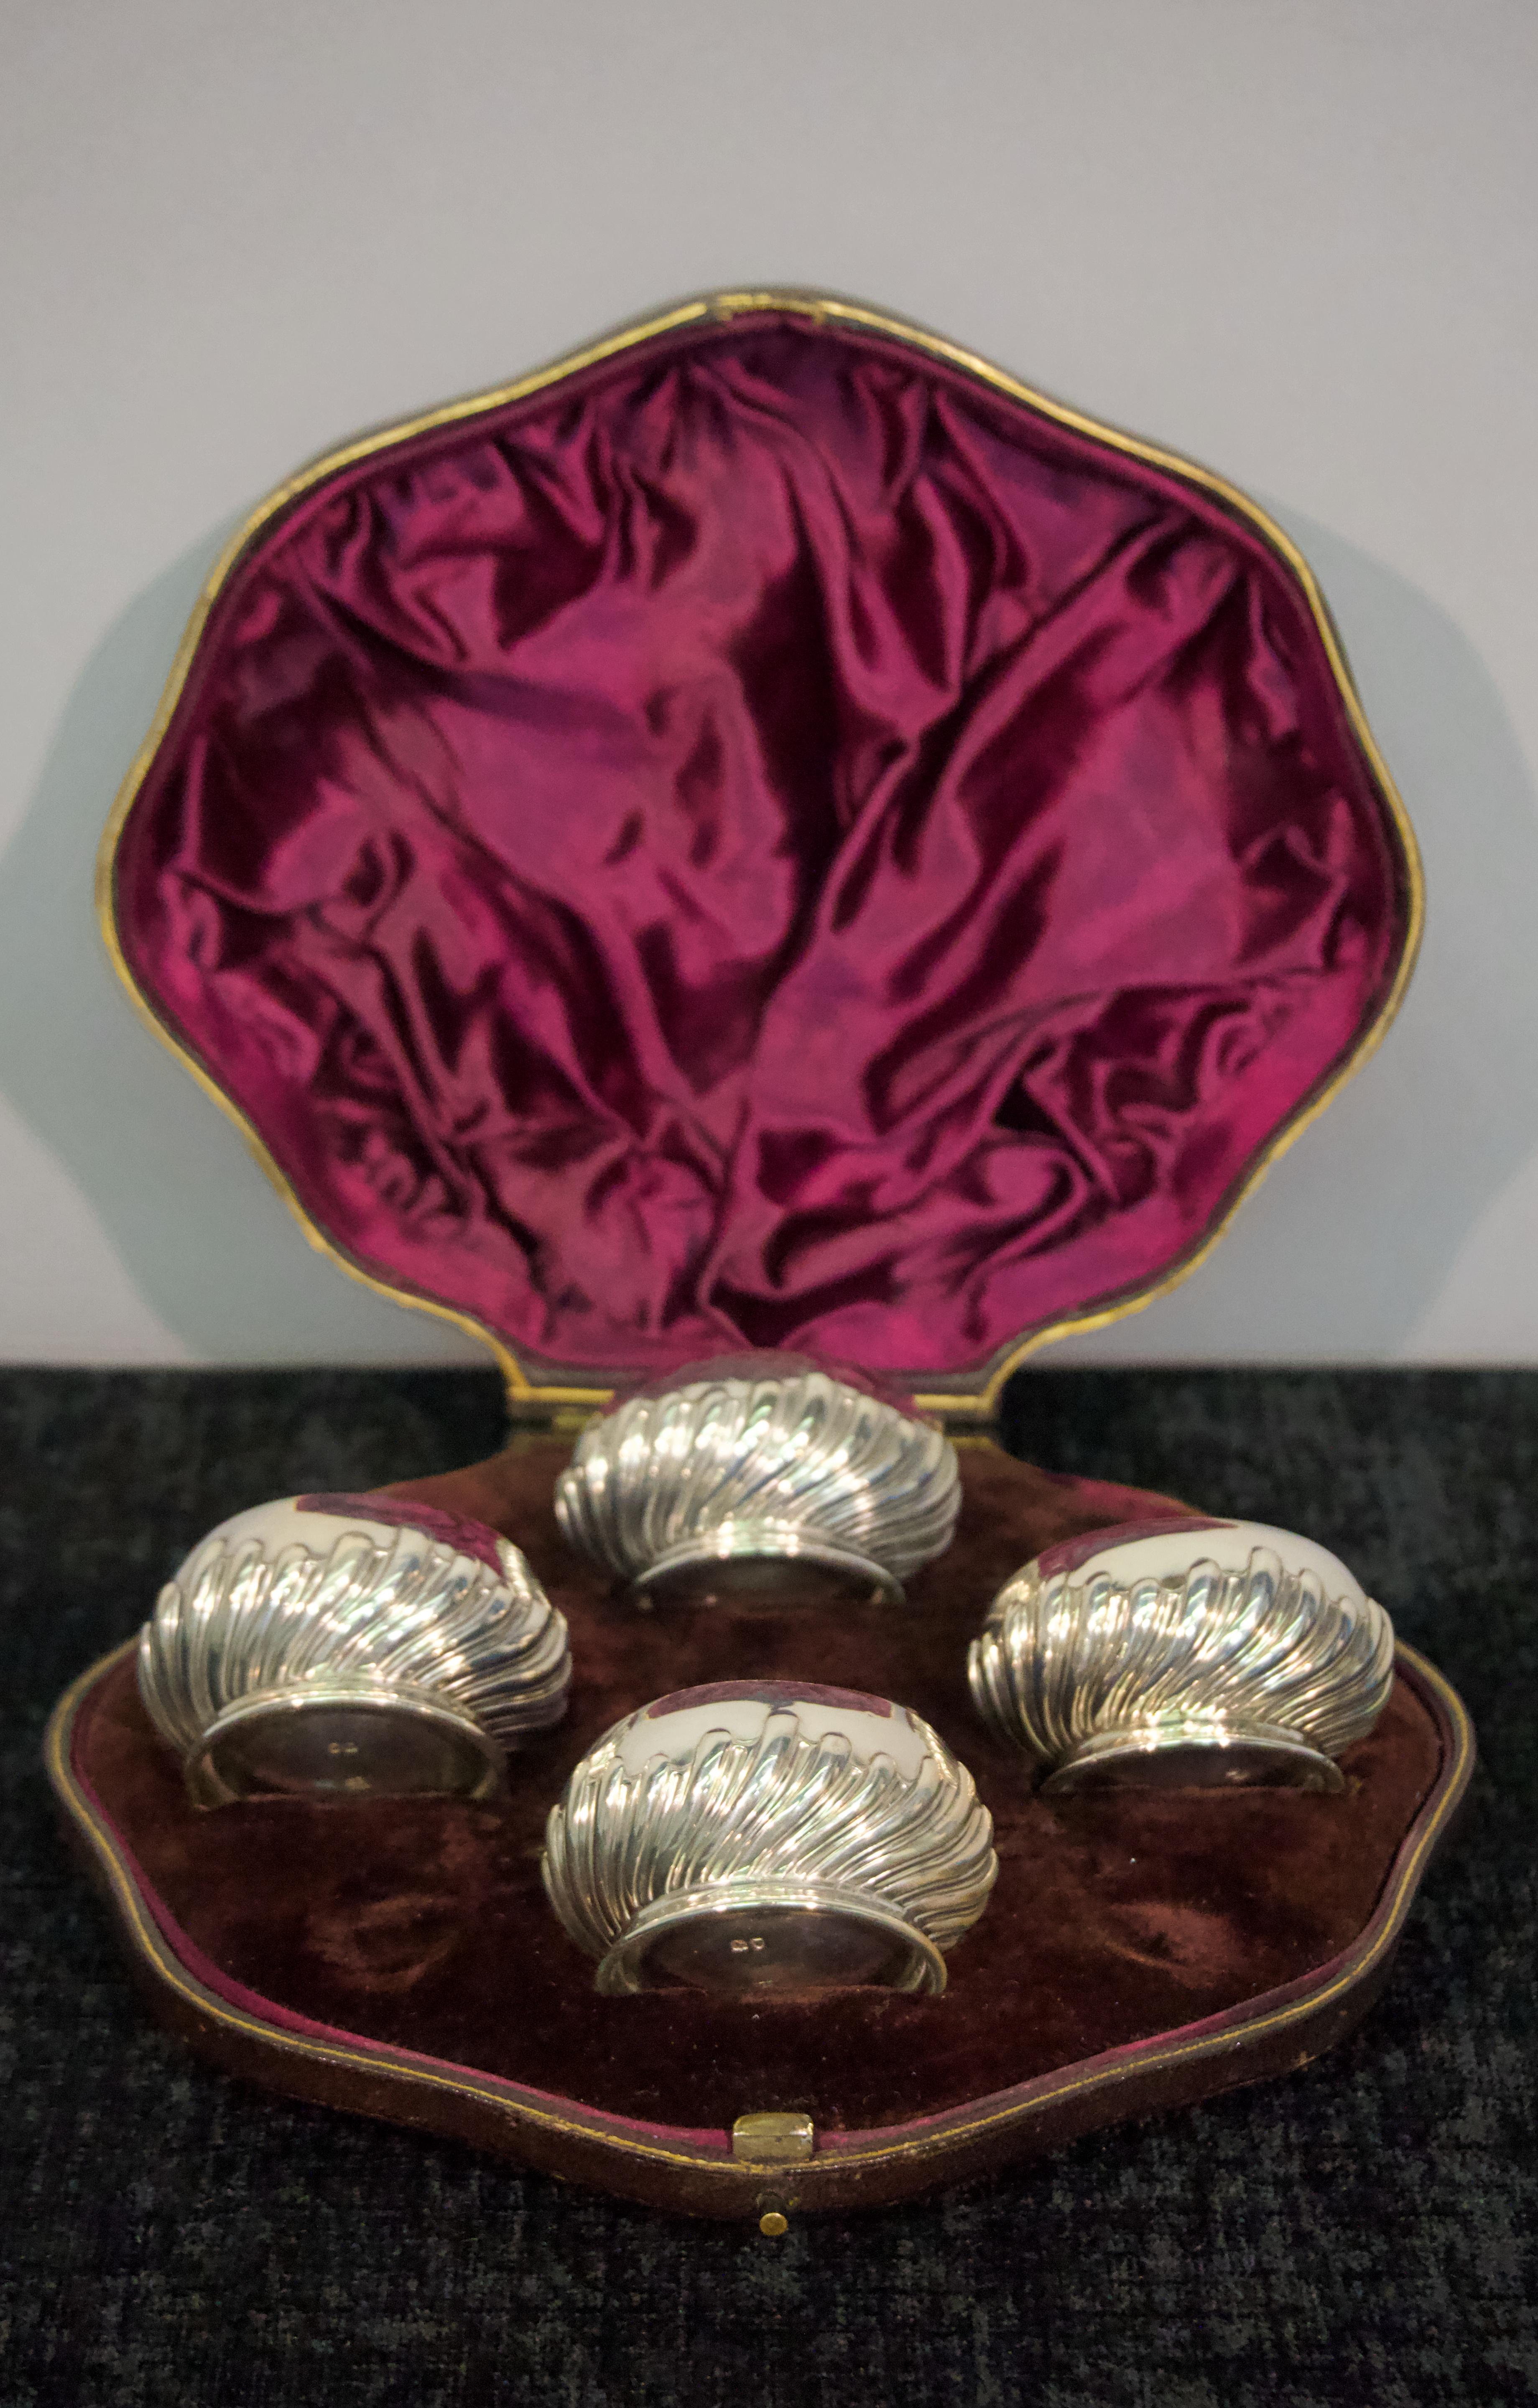 With cobalt blue glass bowl inserts and leather presentation case.
Dimensions:
Box width 7 ½, depth 7”, height 2 3/4”
Containers diameter 2”, height 1 1/2”.